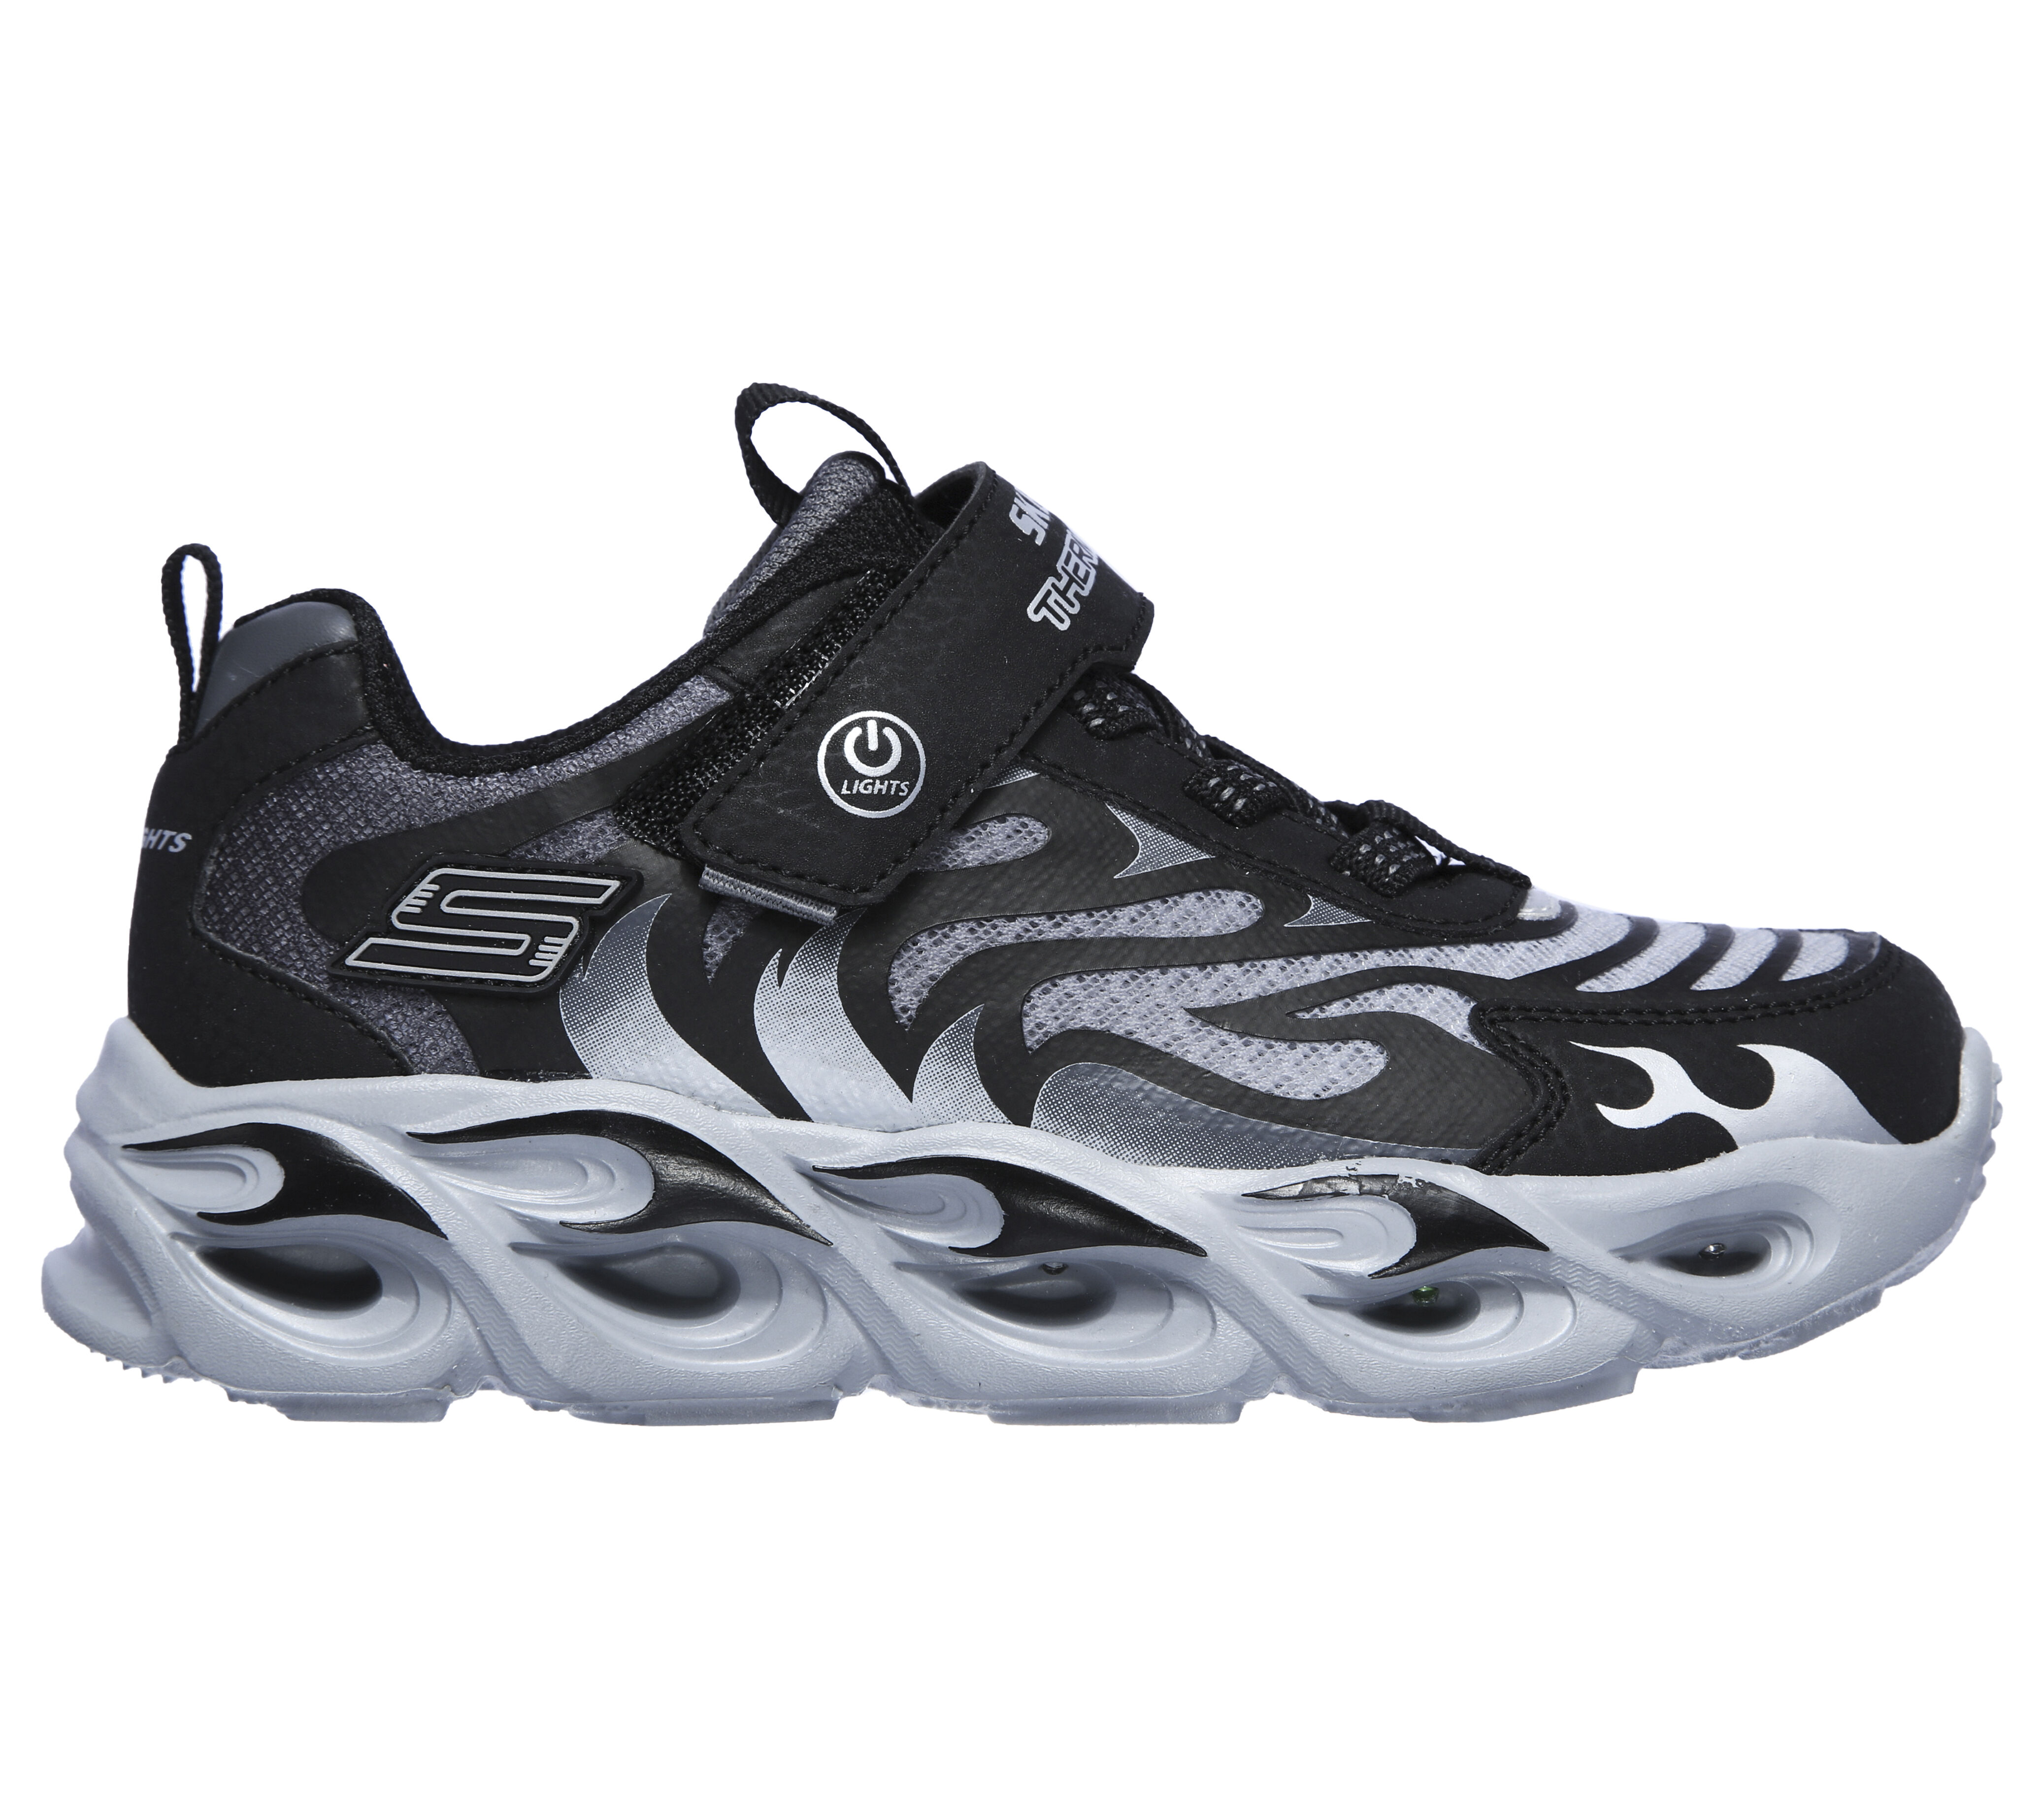 new skechers light up shoes